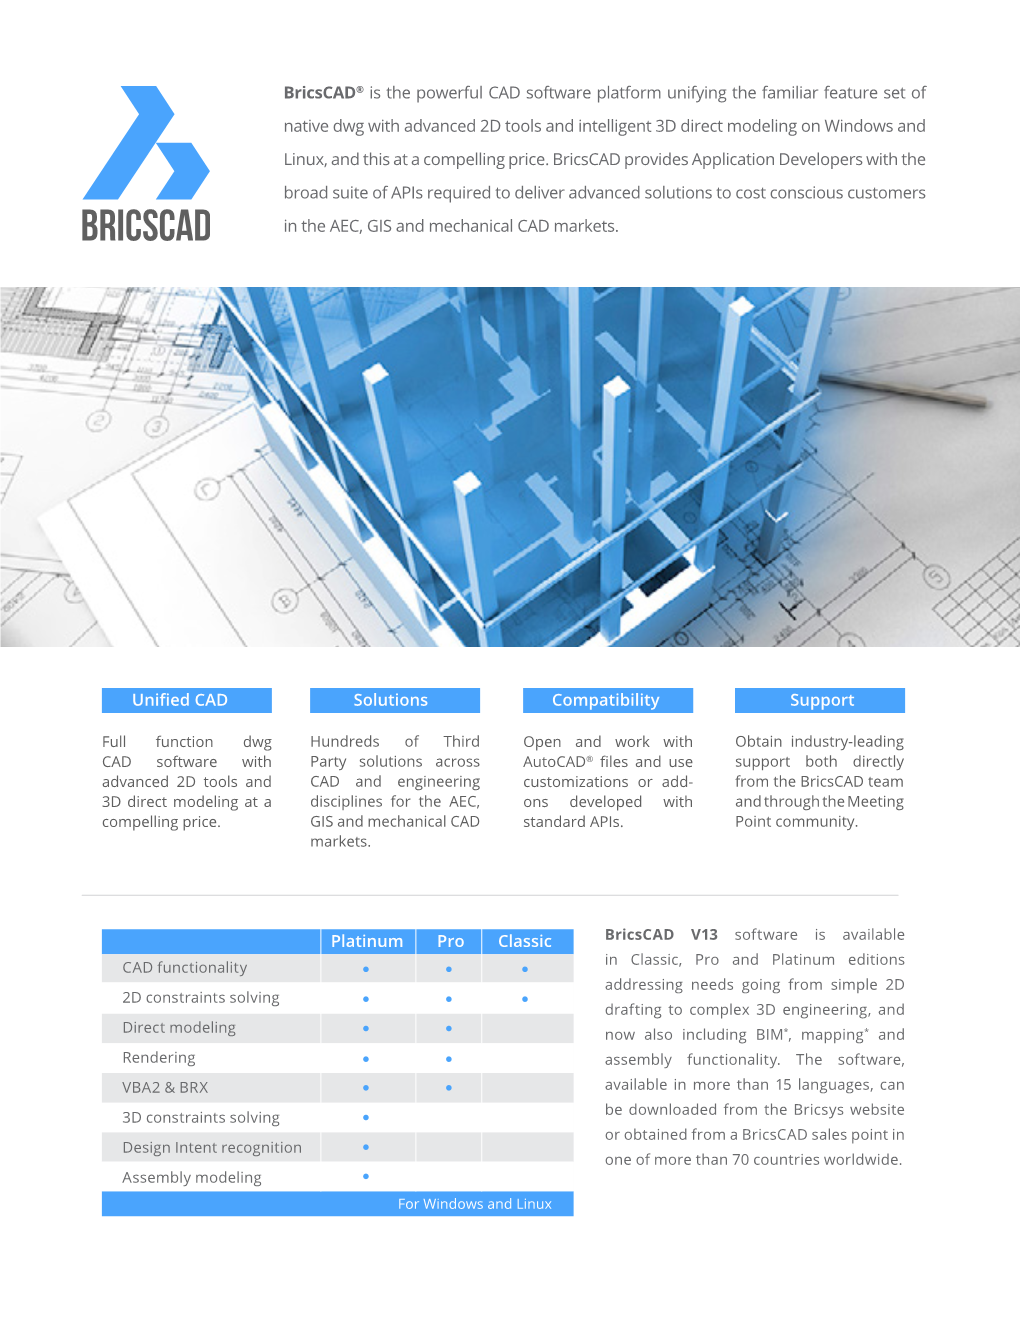 Bricscad® Is the Powerful CAD Software Platform Unifying The